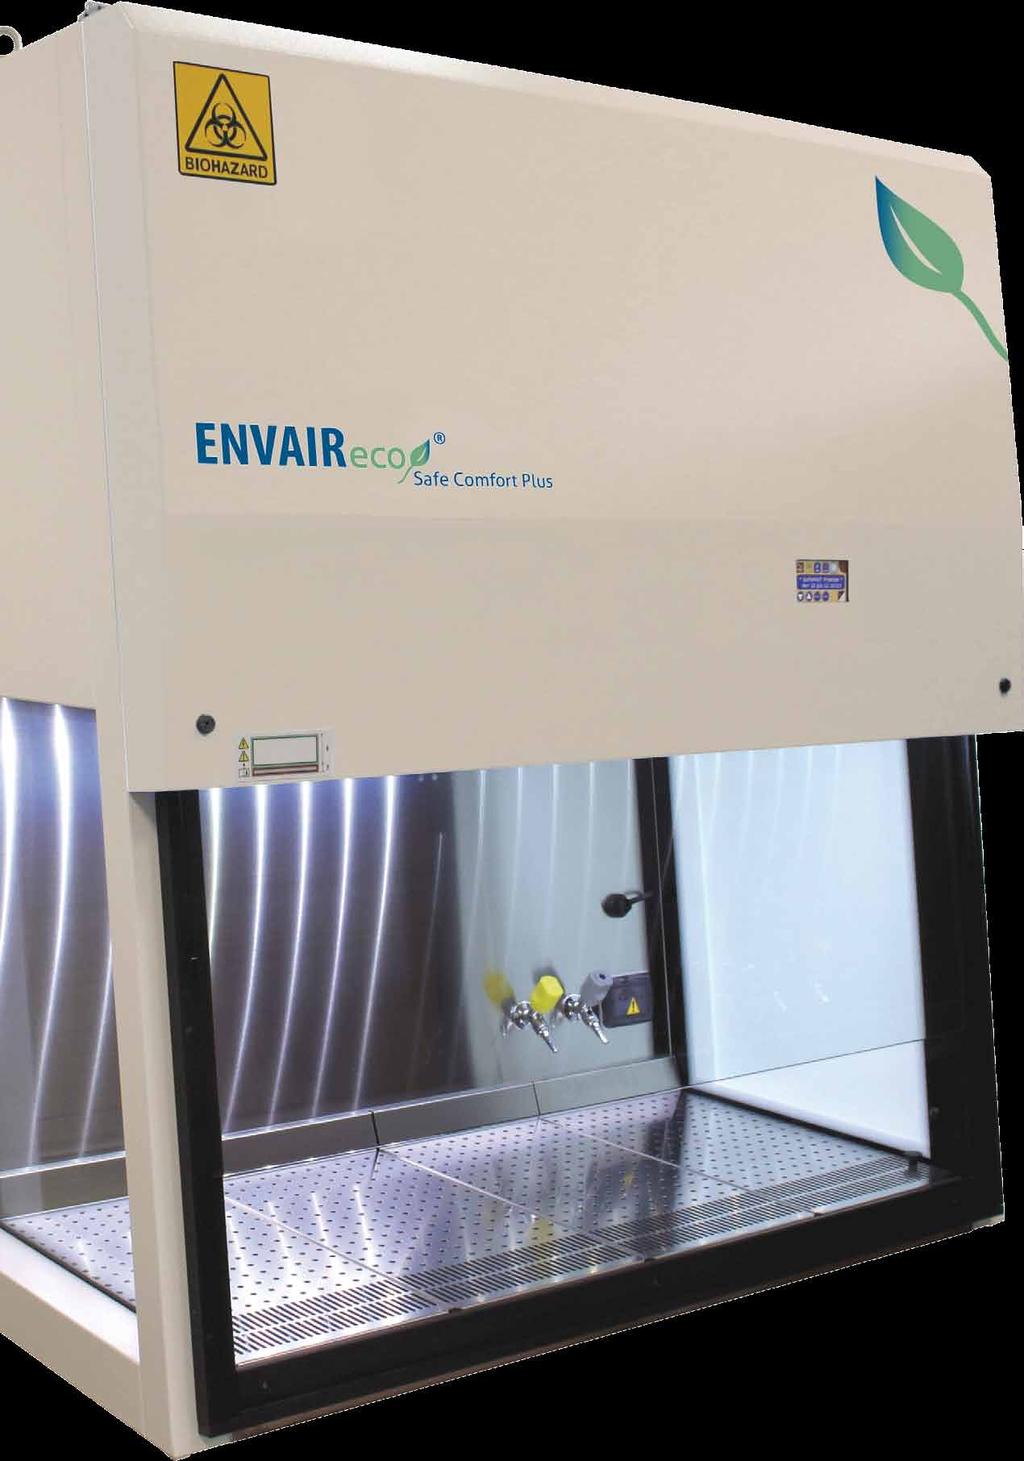 ENVAIR eco safe Comfort Plus vertical laminar flow cabinets are Class II Microbiological Safety Cabinets - designed and built to performance requirements of the EN-12469: 2000 European Standard, with